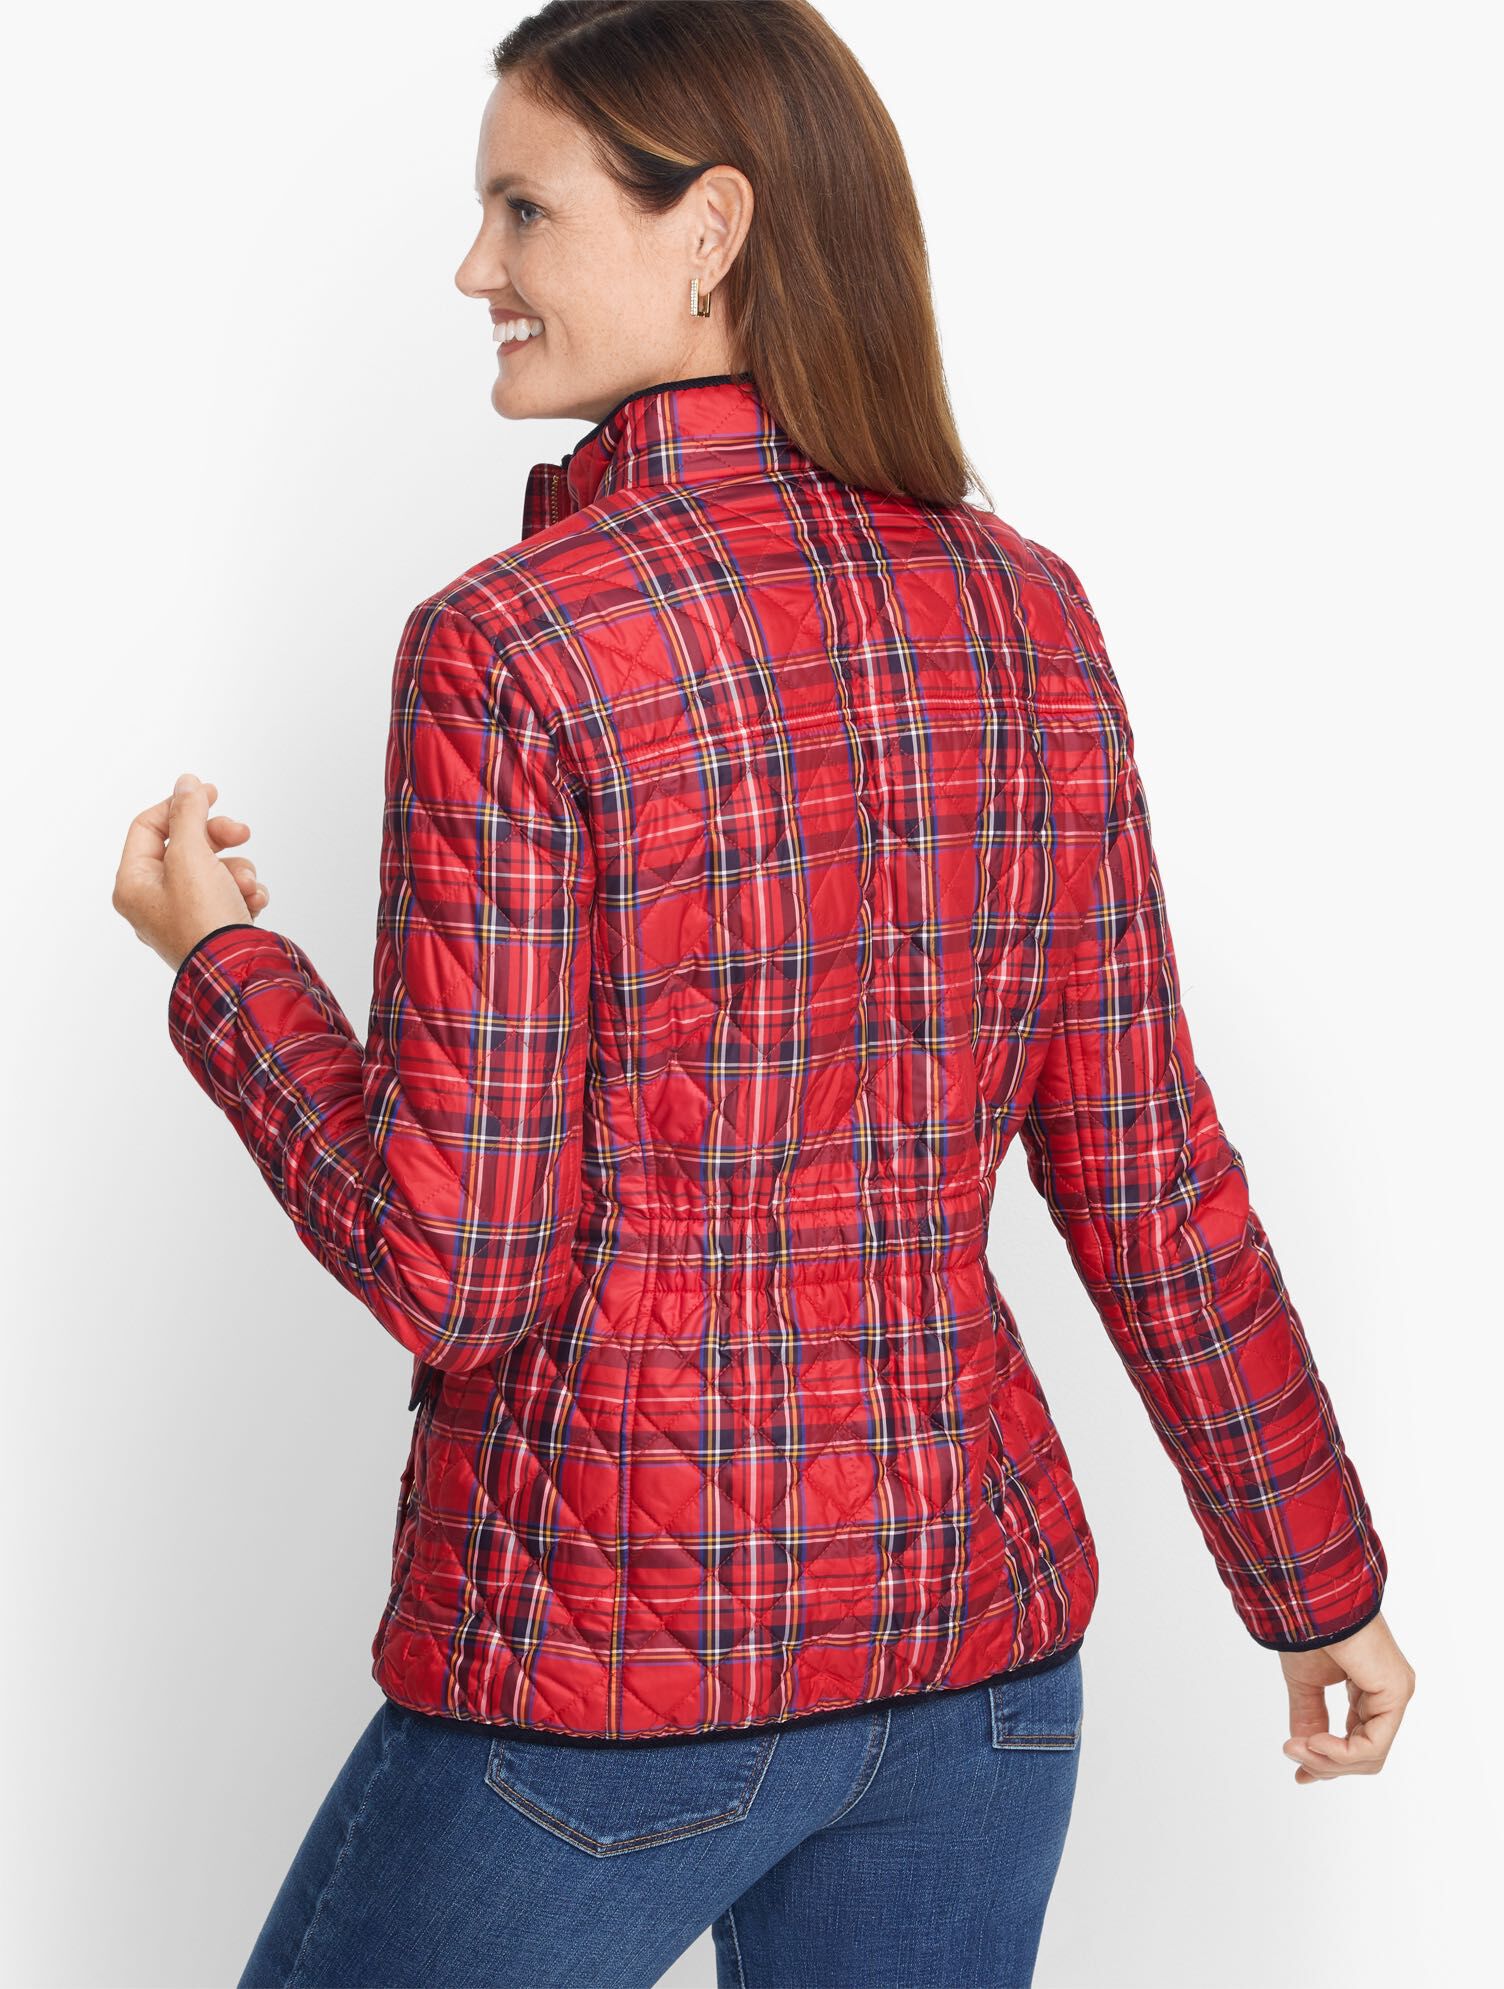 Quilted Plaid Jacket